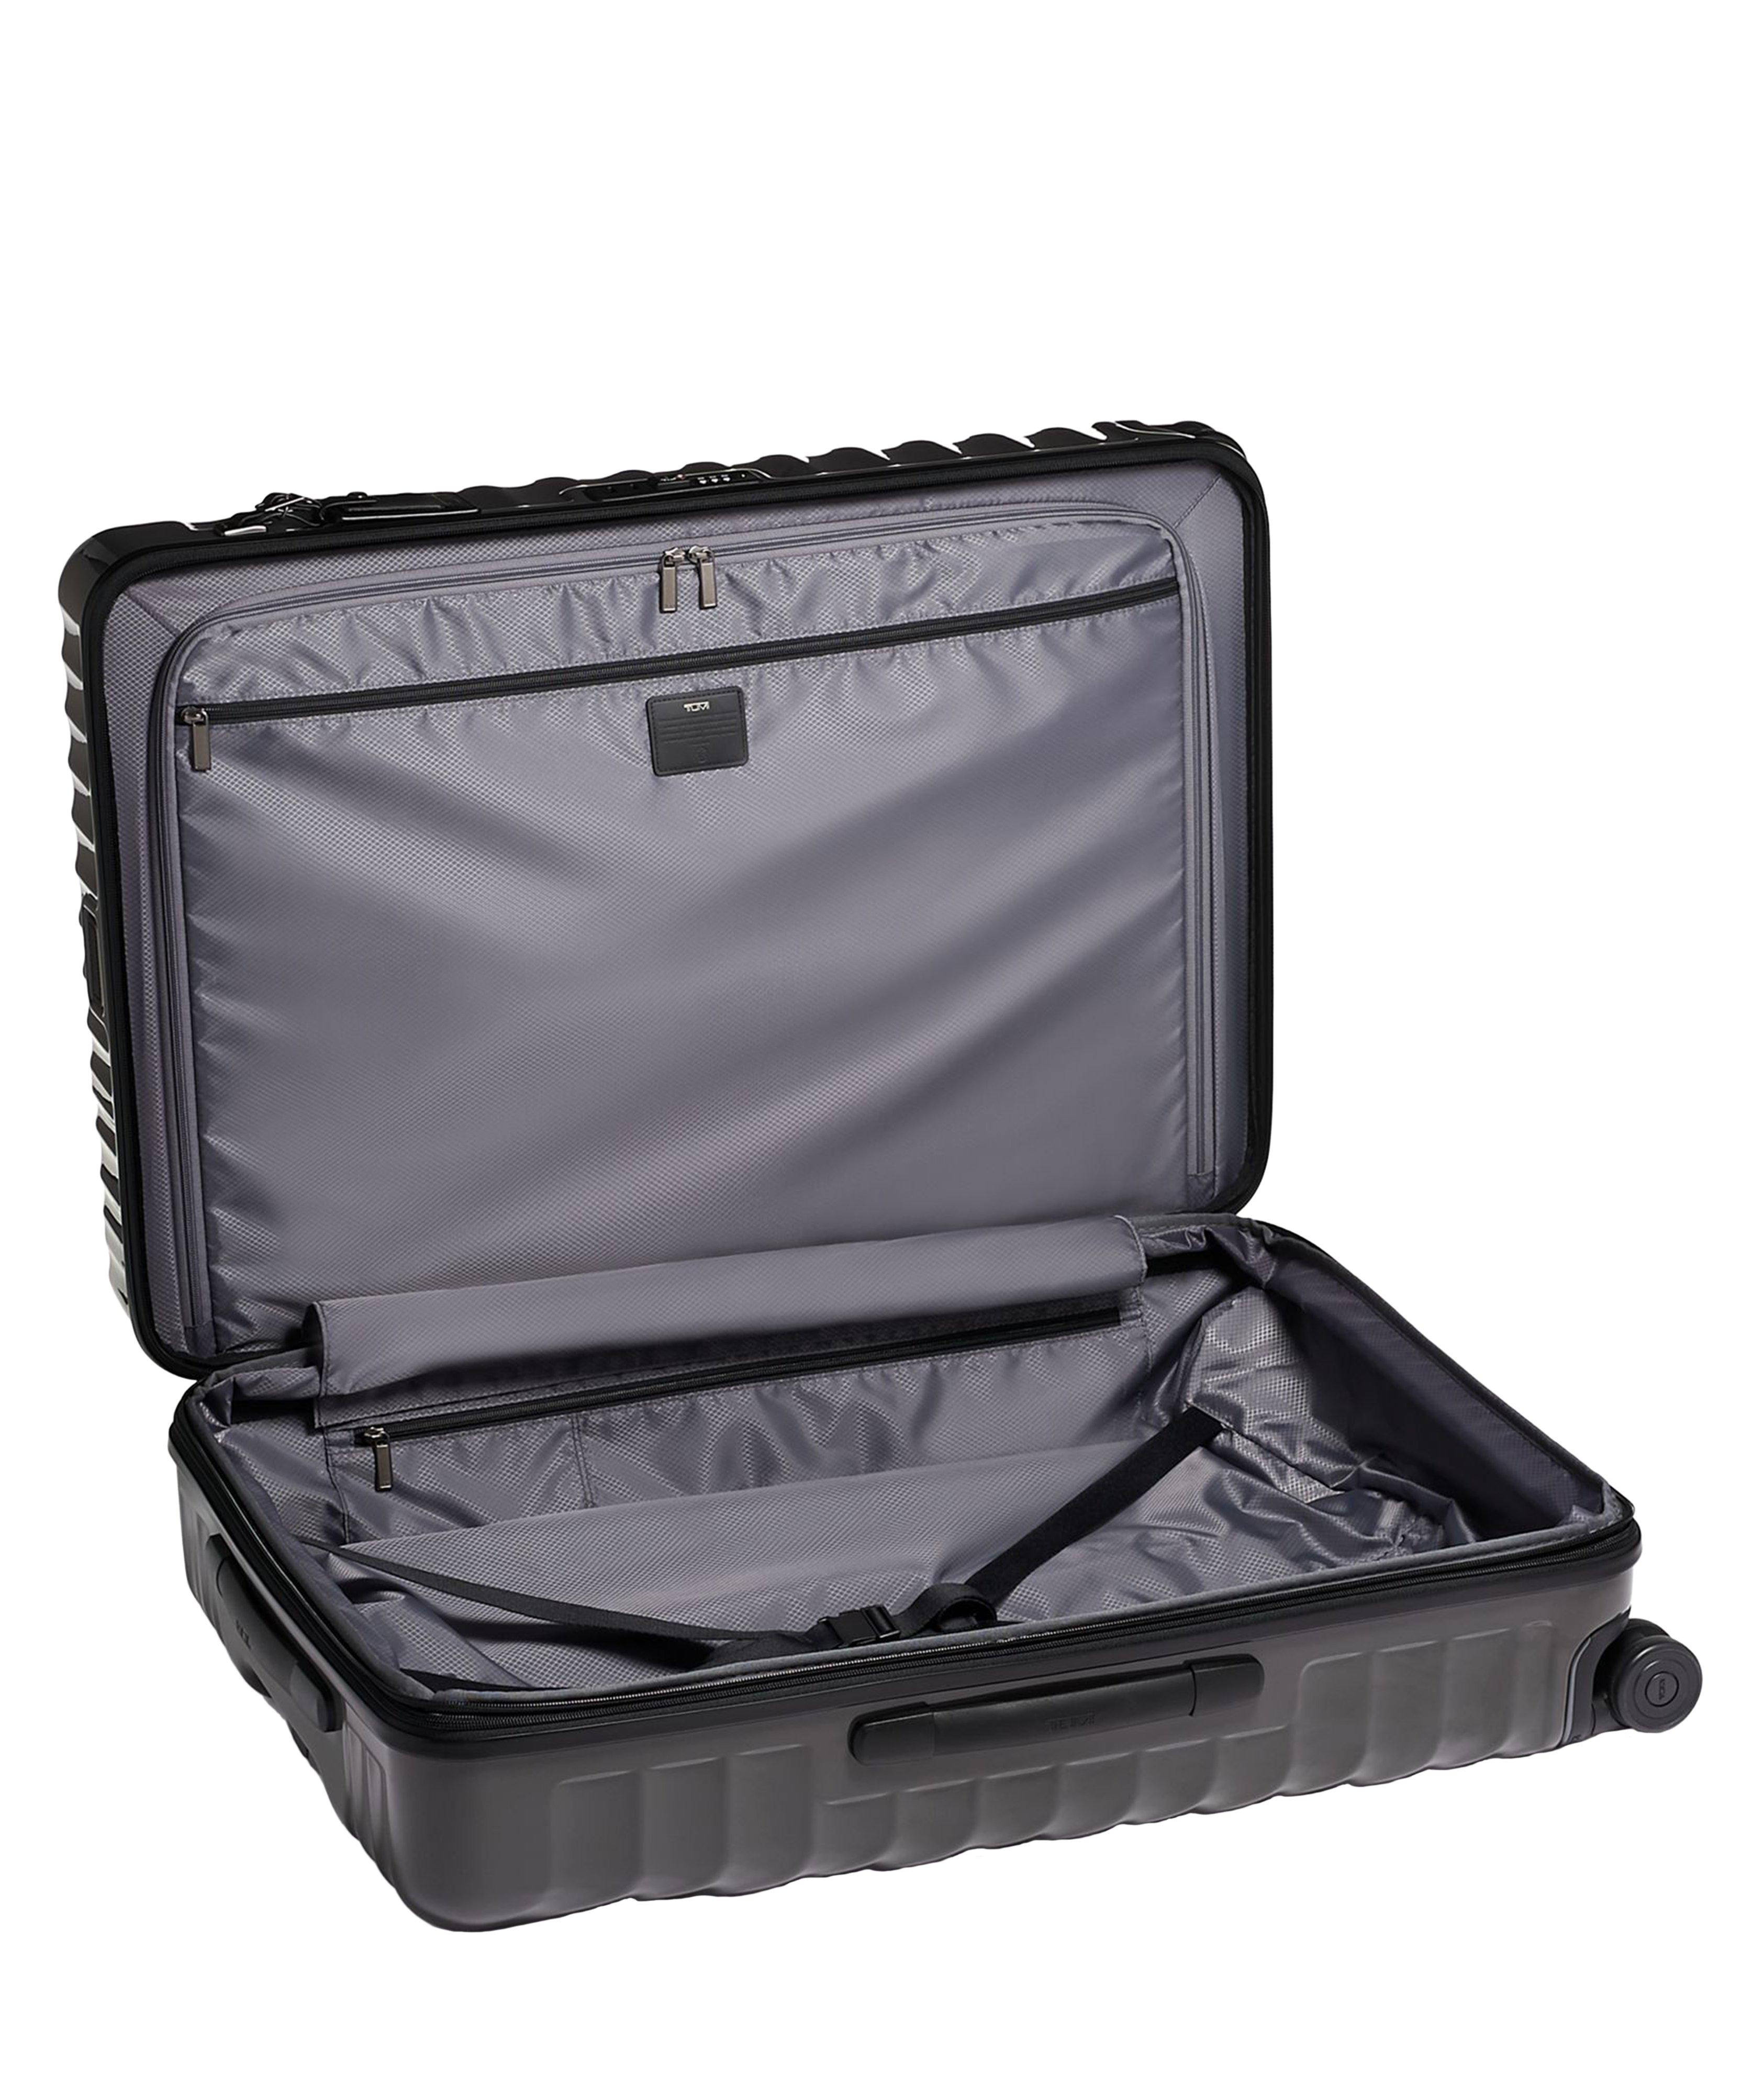 Extended Trip Expandable 4-Wheel Packing Case image 1